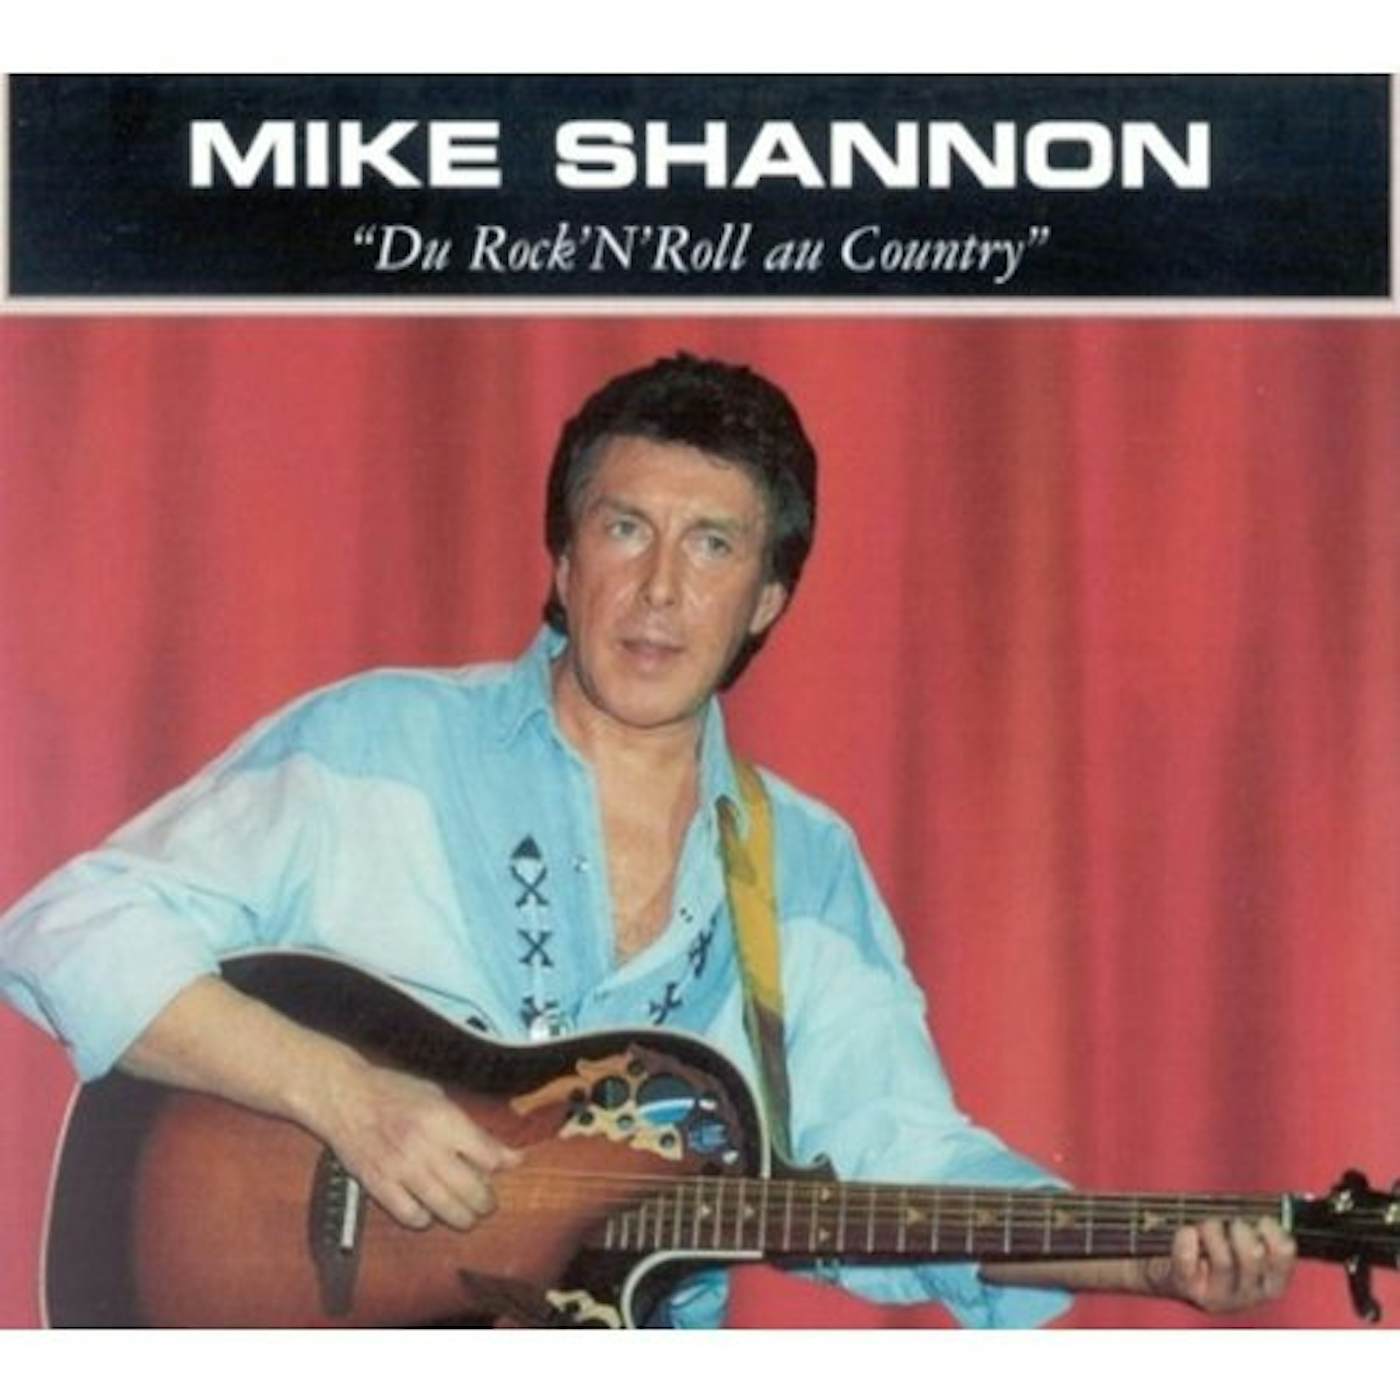 Mike Shannon DU ROCK N ROLL AU COUNTRY CD